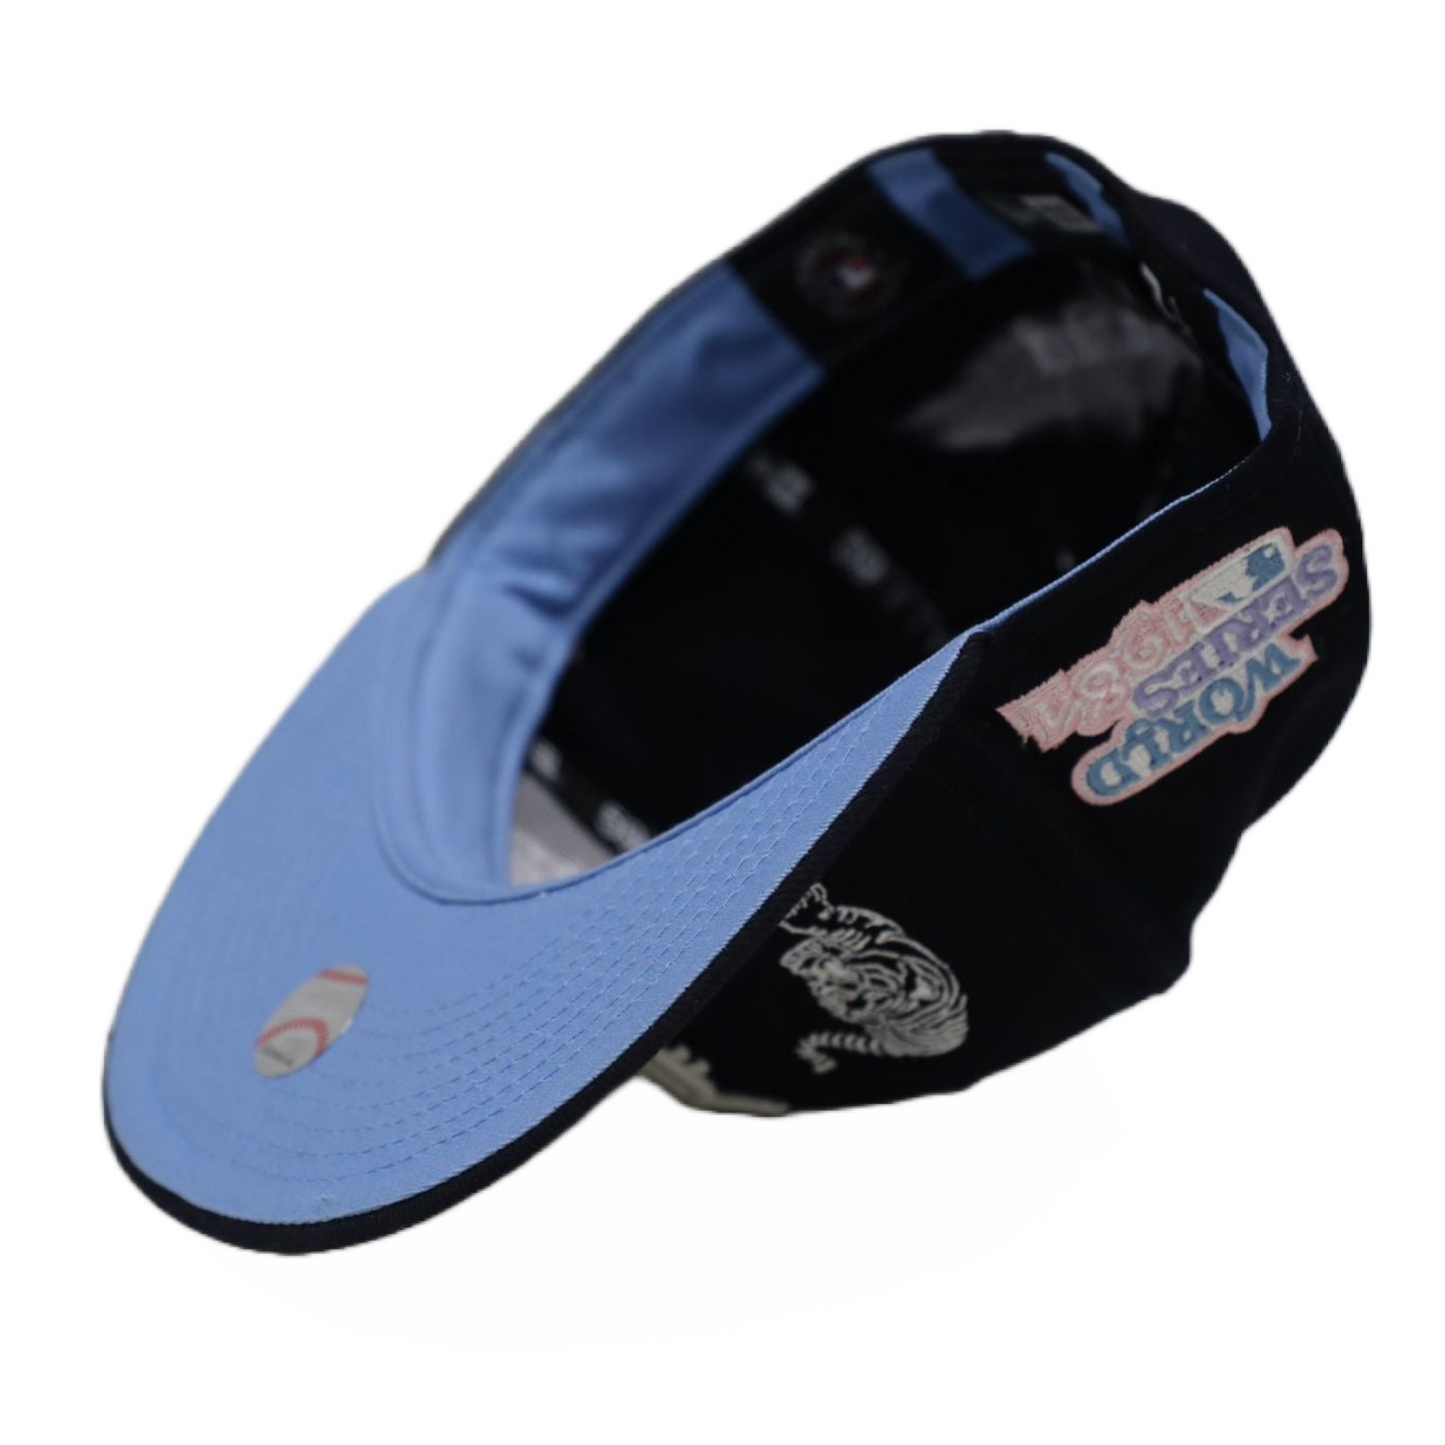 DETROIT TIGERS UK FITTEDS EXCLUSIVE 59FIFTY FITTED CAP BABY BLUE UNDERVISOR